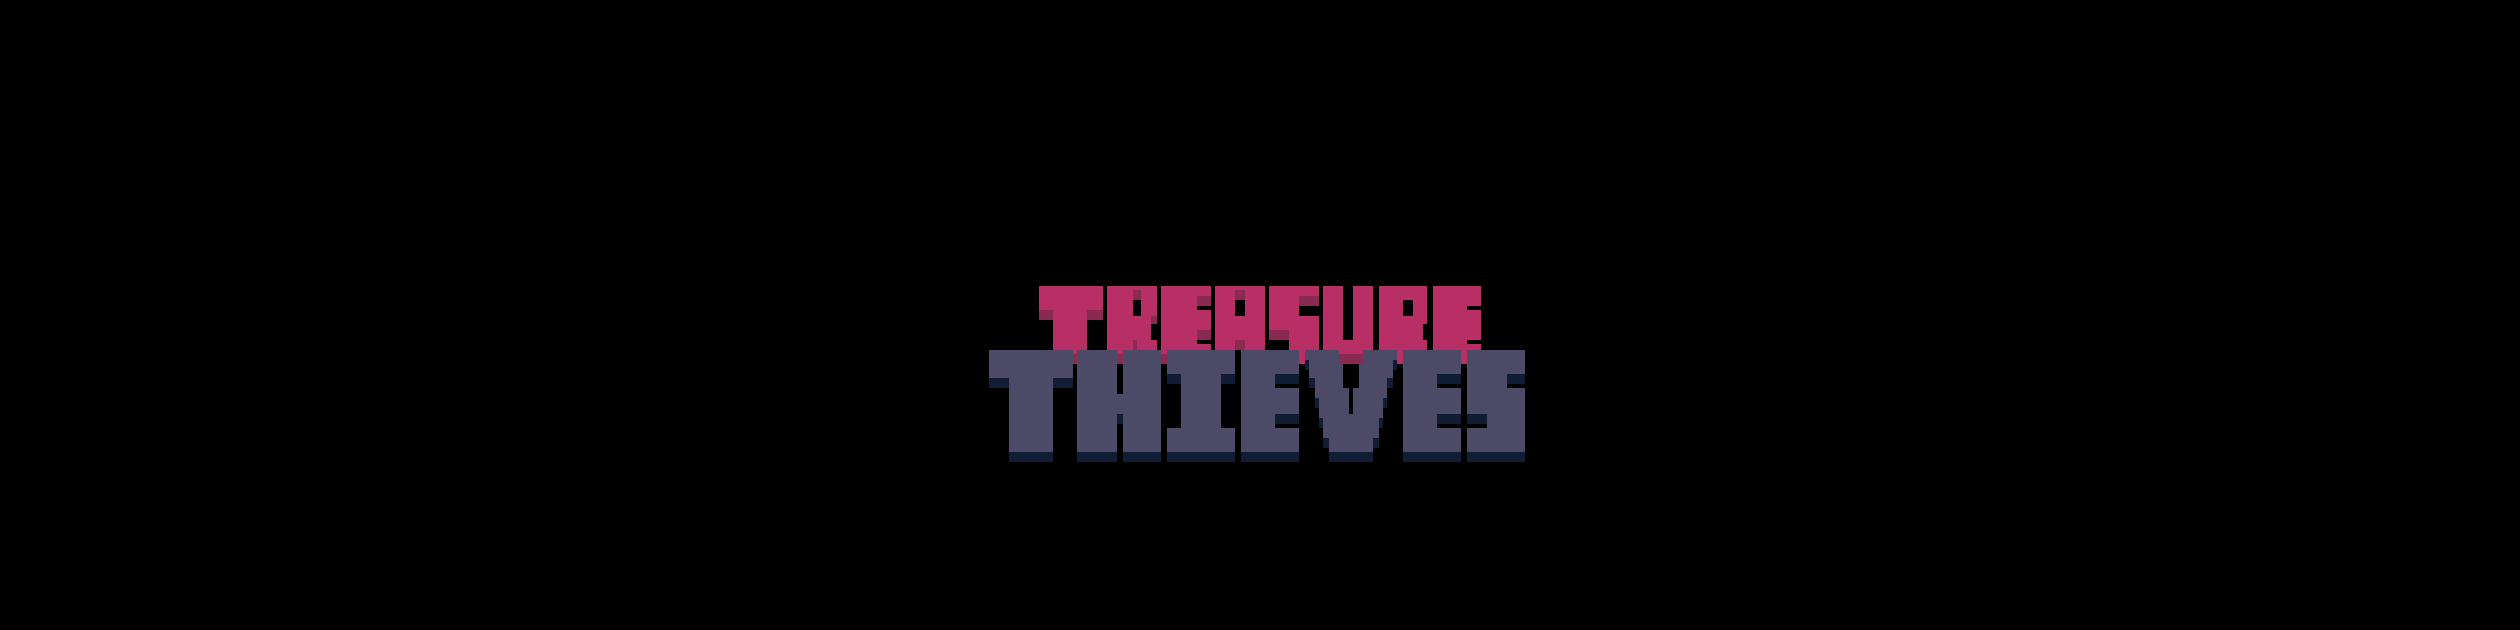 Treasure Thieves (not to standard)